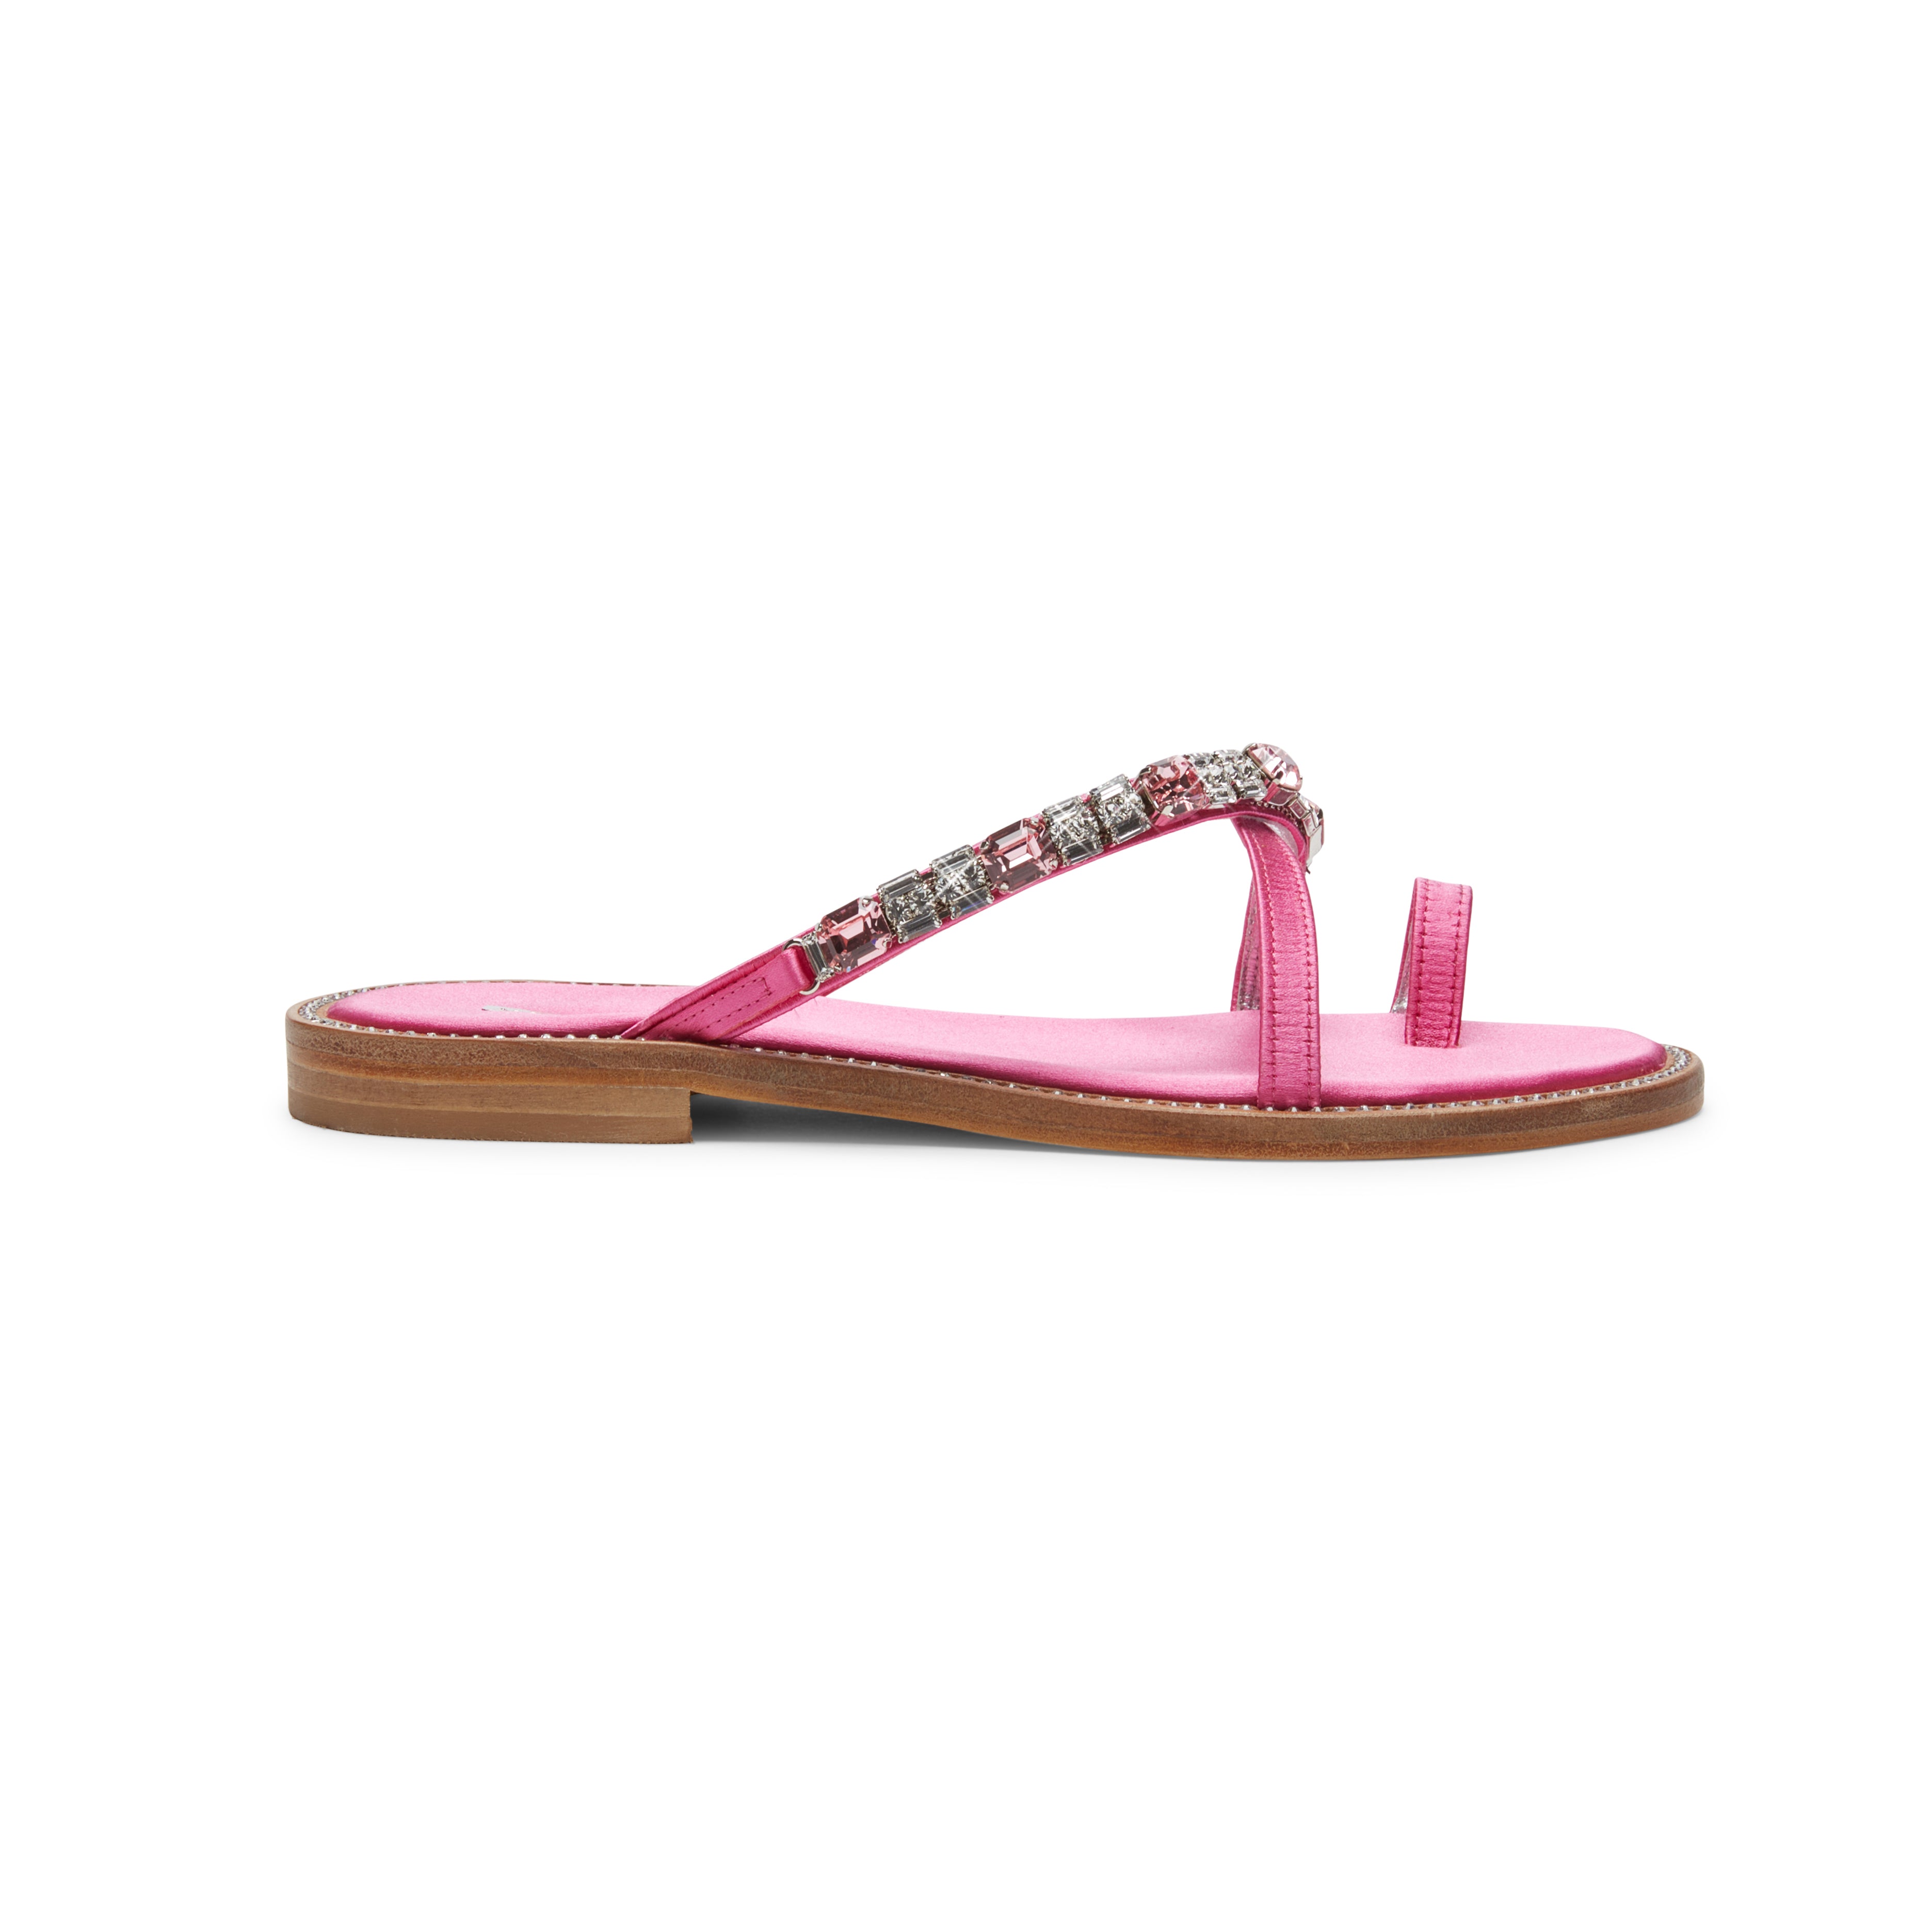 Jeweled Magenta Sandals - Satin Shoes: Alma | Alexis Isabel – Alexis Isabel